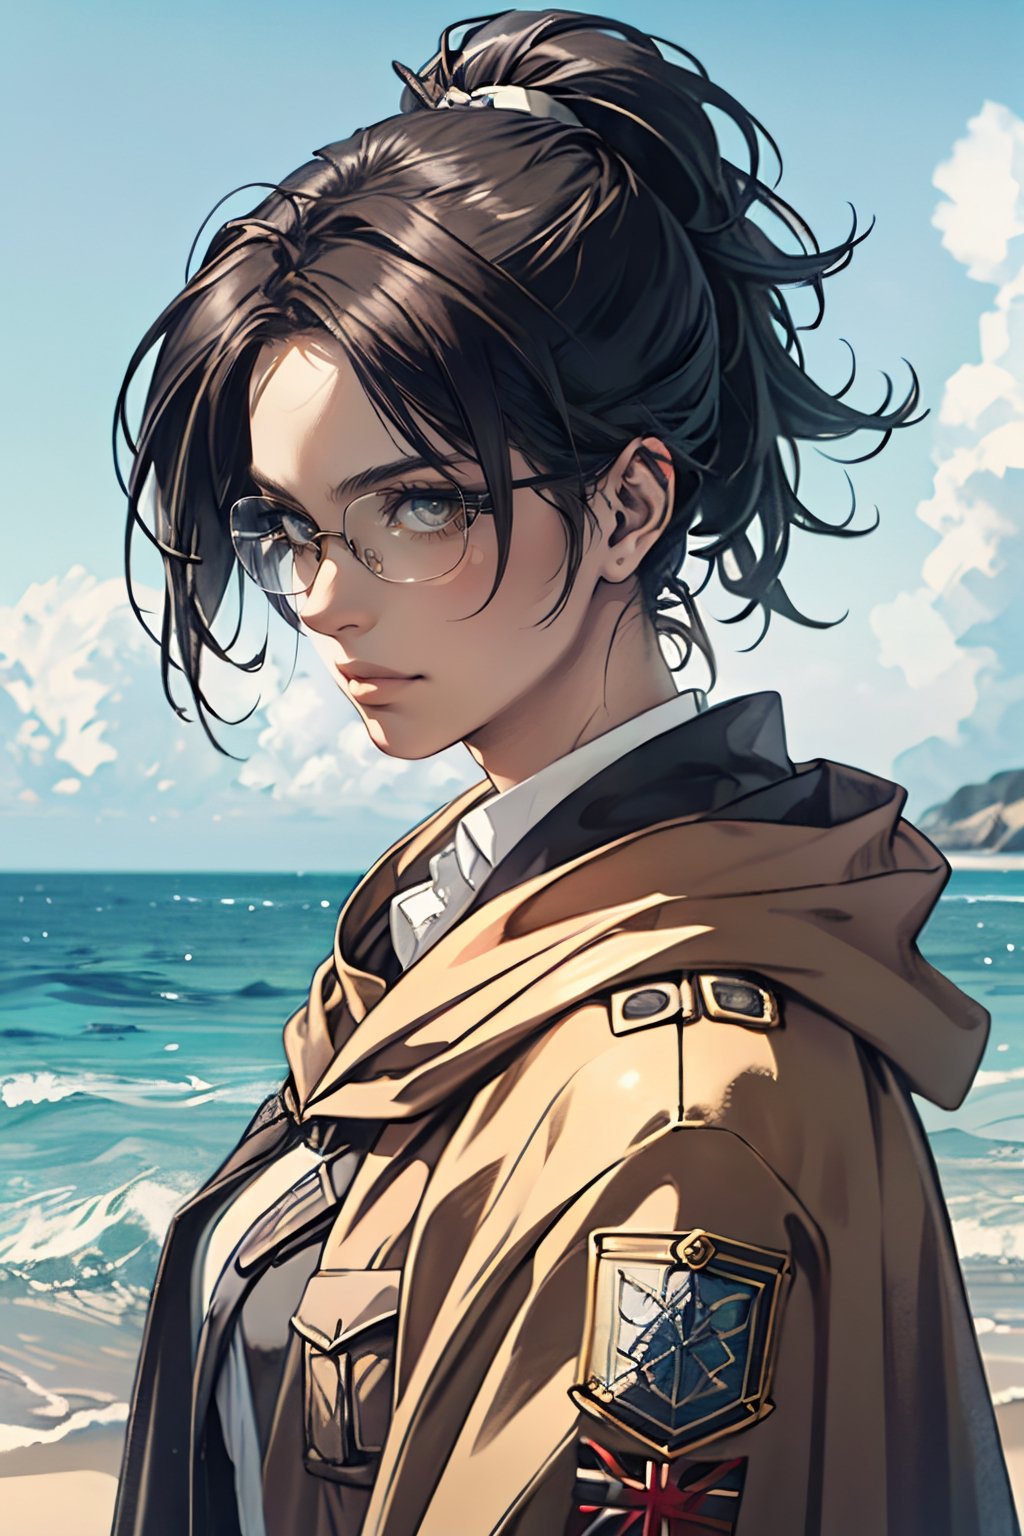 1 girl, HangeAOT, dark brown hair, messy high ponytail, light brown eyes, (aquiline nose:1.2), pure white collared shirt, (green scouts cloak:1.2), glasses, (black eye patch on left eye), fit body, mature, 35 years old, charming, alluring, (standing), (upper body in frame), simple background, endless ocean, pink cloudy sky, dawn, 1910s harbor, only1 image, perfect anatomy, perfect proportions, perfect perspective, 8k, HQ, (best quality:1.5, hyperrealistic:1.5, photorealistic:1.4, madly detailed CG unity 8k wallpaper:1.5, masterpiece:1.3, madly detailed photo:1.2), (hyper-realistic lifelike texture:1.4, realistic eyes:1.2), picture-perfect face, perfect eye pupil, detailed eyes, realistic, HD, UHD, (front view, symmetrical picture, vertical symmetry:1.2), look at viewer,AttackonTitan,HangeAOT, survey military uniform